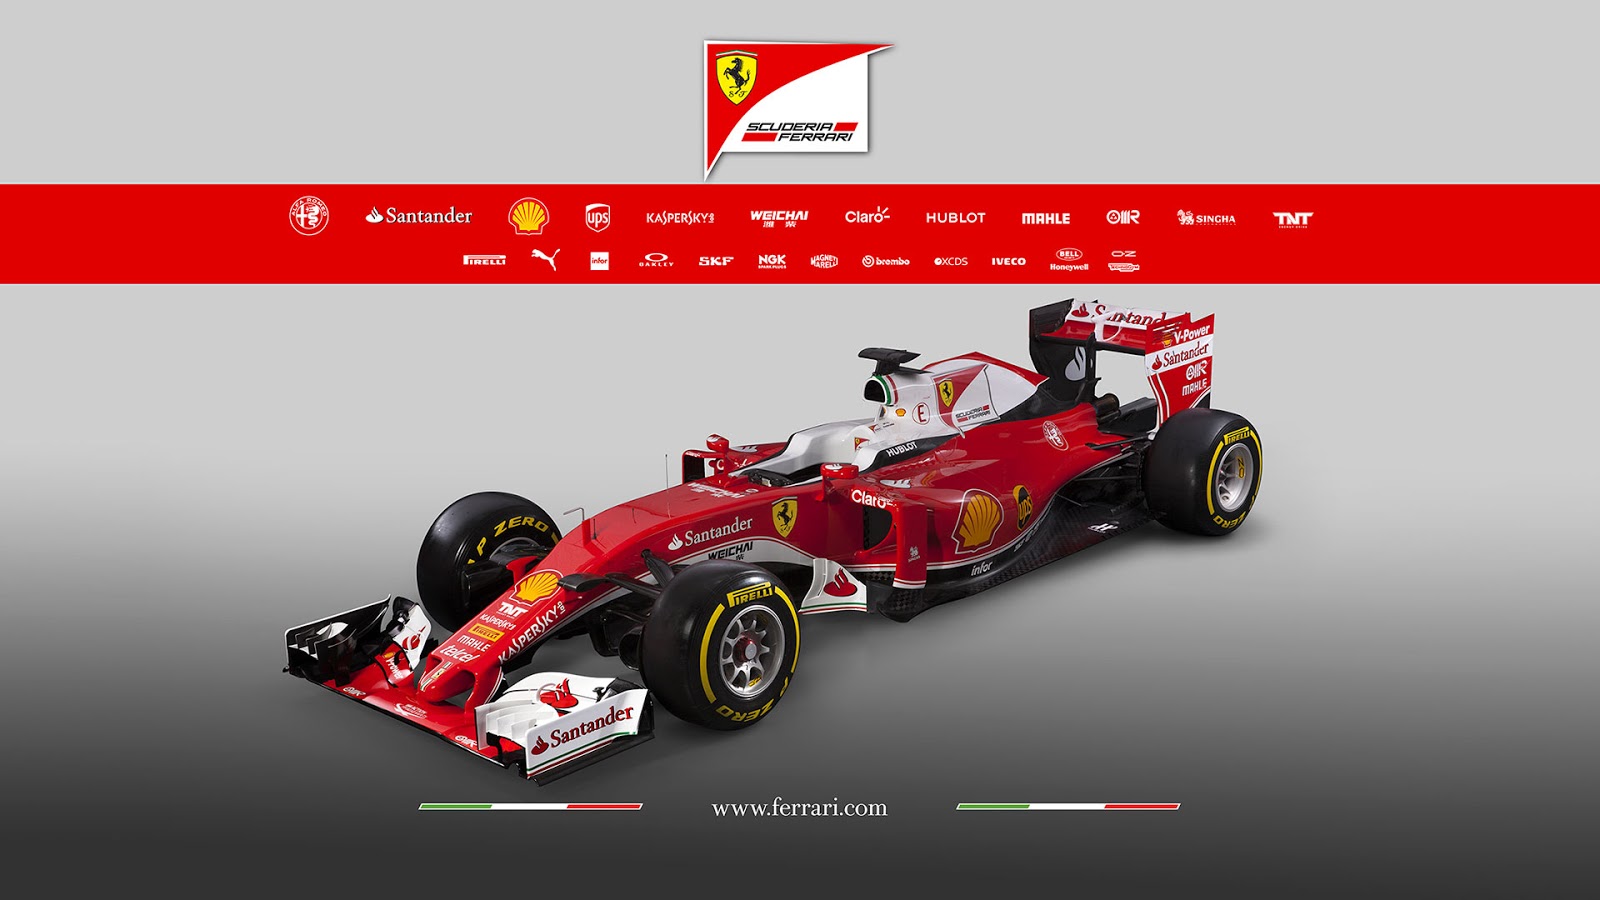 Download F1 2016 wallpapers for mobile phone free F1 2016 HD pictures